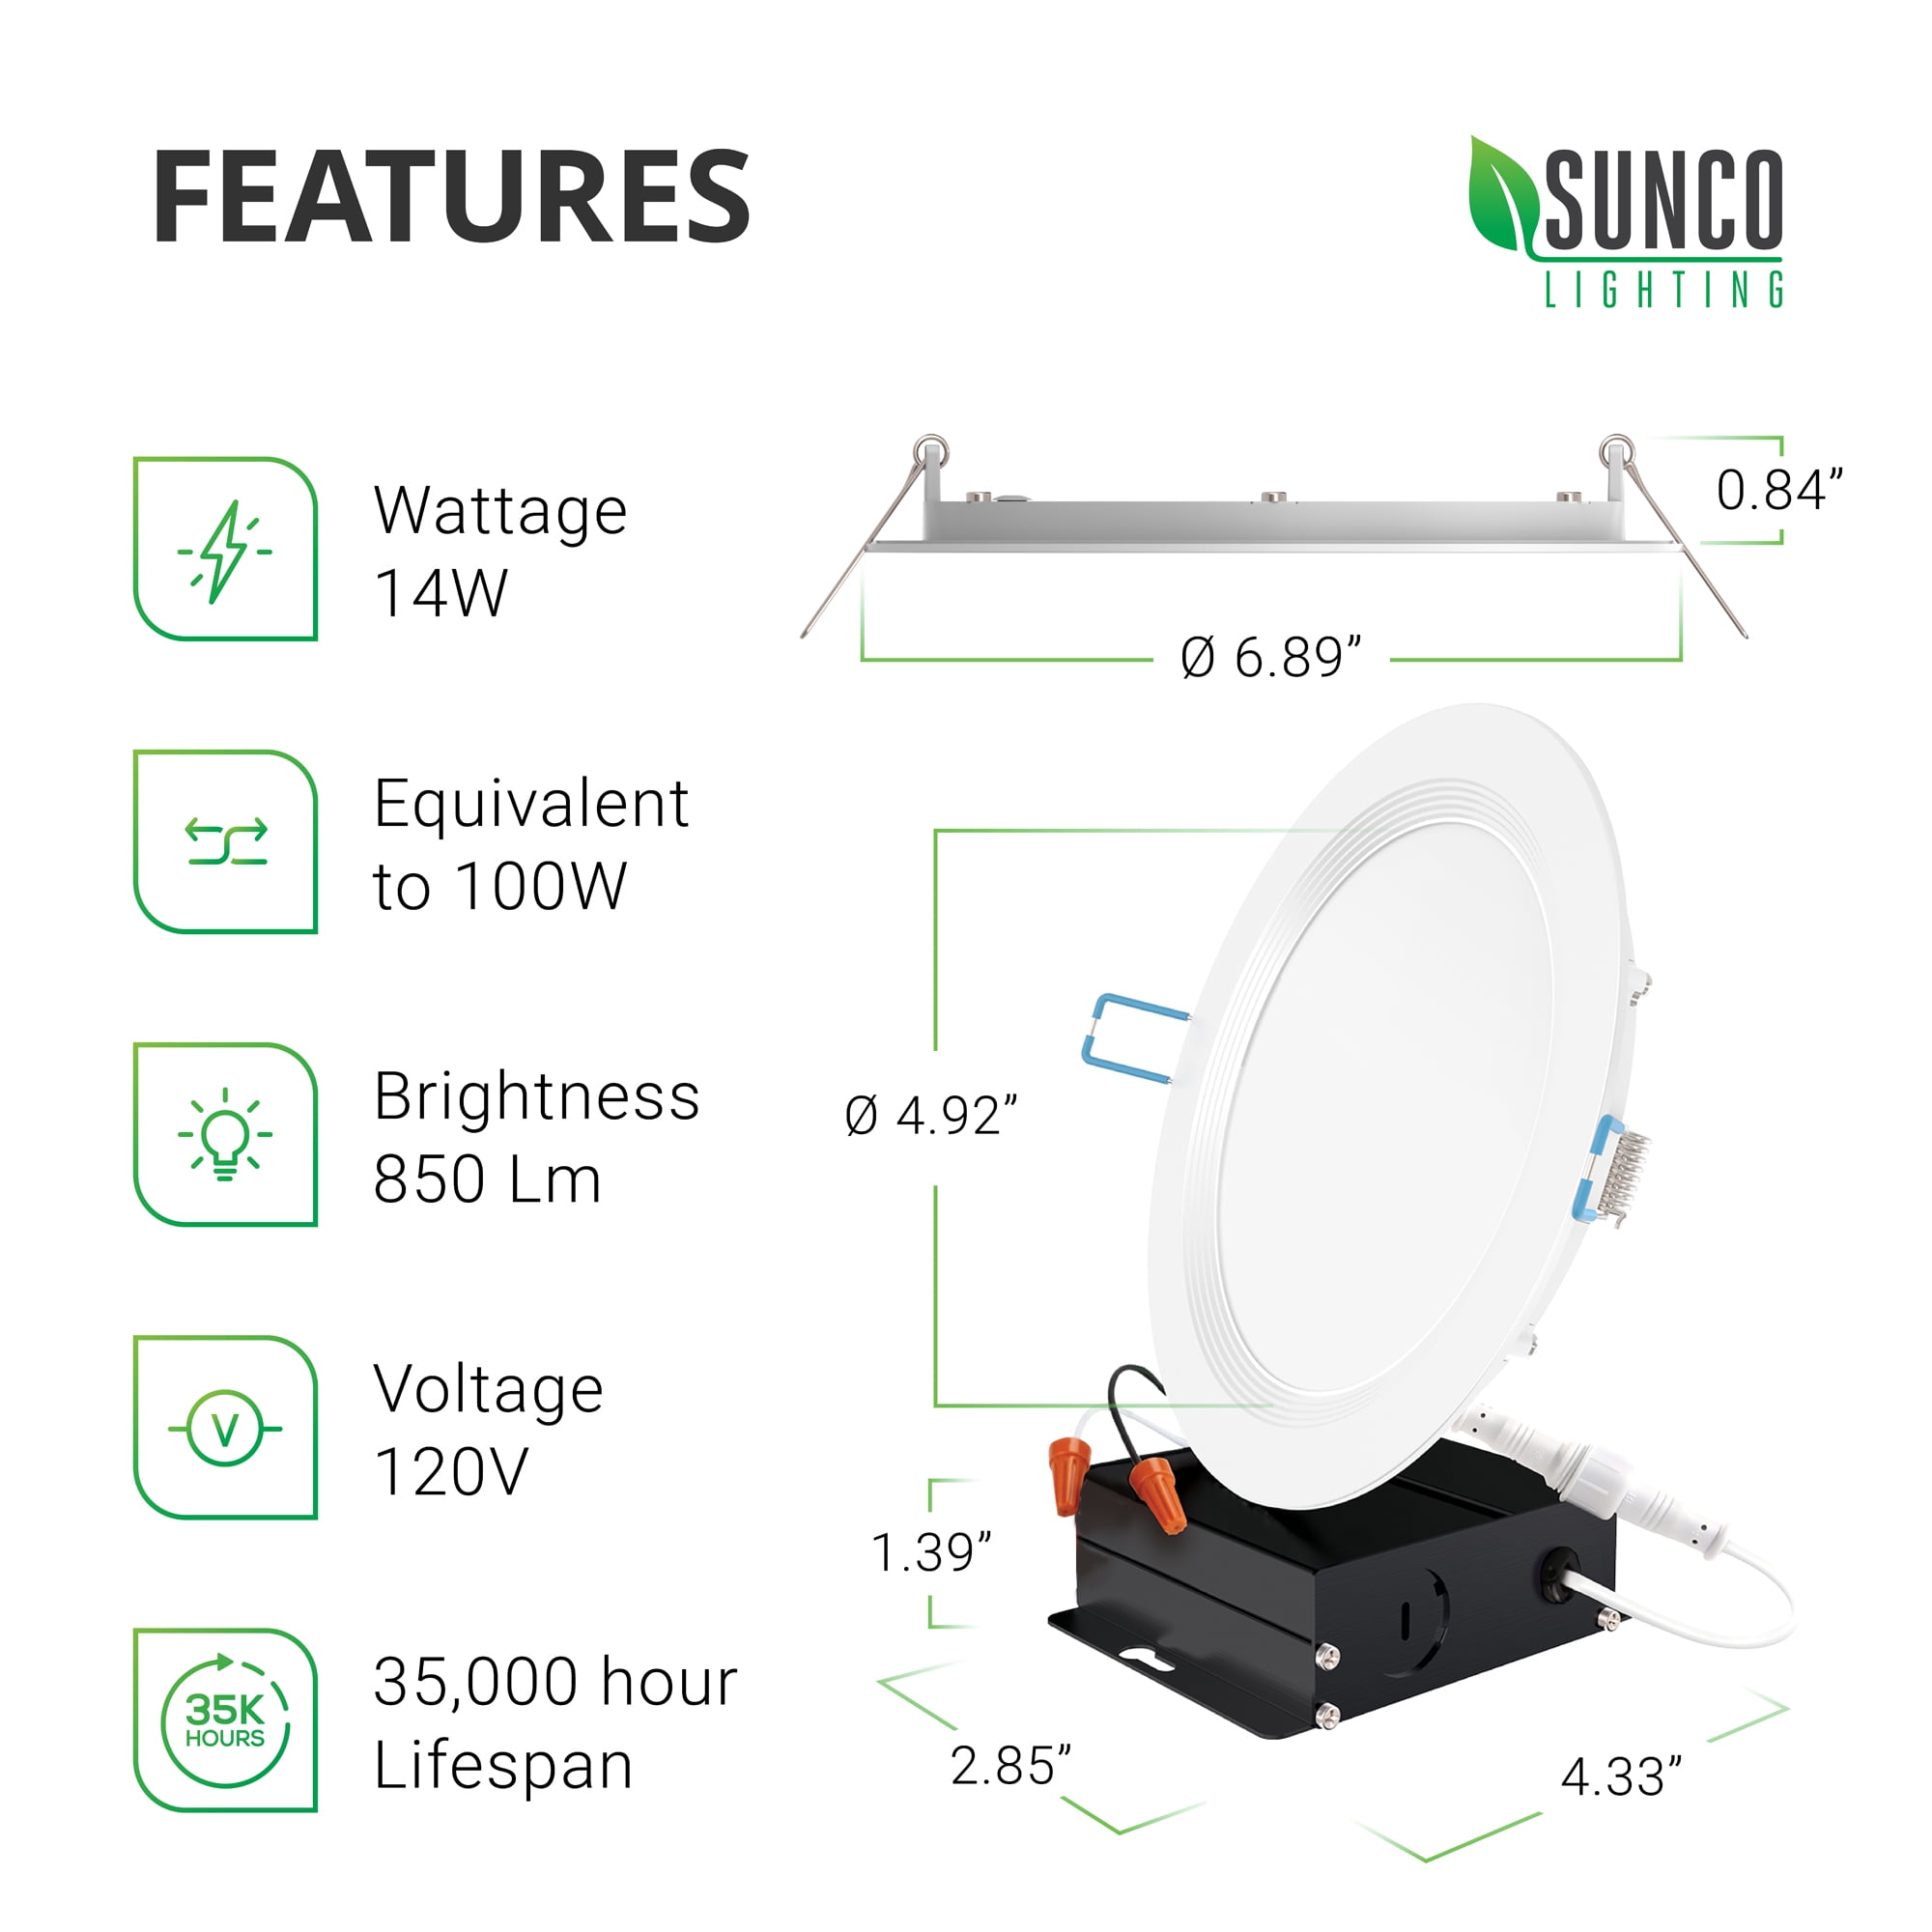 Sunco Lighting 6 Inch Slim LED Downlight, Baffle Trim, Junction Box,  14W=100W, 850 LM, Dimmable, 6000K Daylight Deluxe, Recessed Jbox Fixture,  IC 